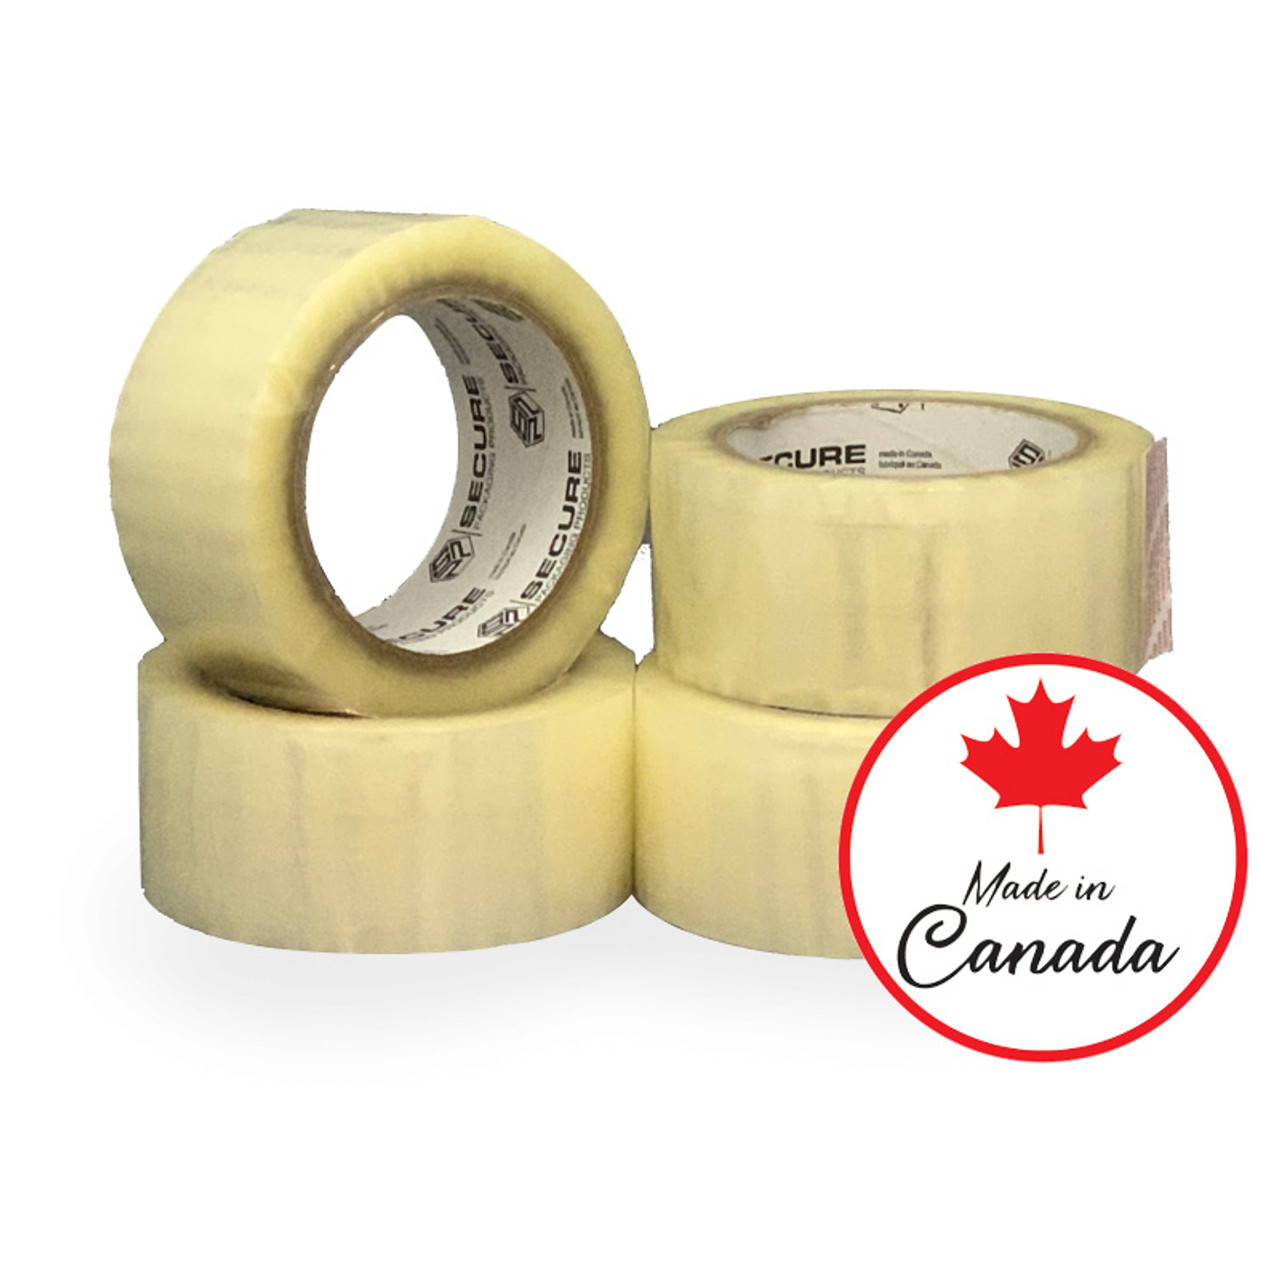 2" x 100 meters clear Packing Tape Replacement Rolls (Made in Canada)